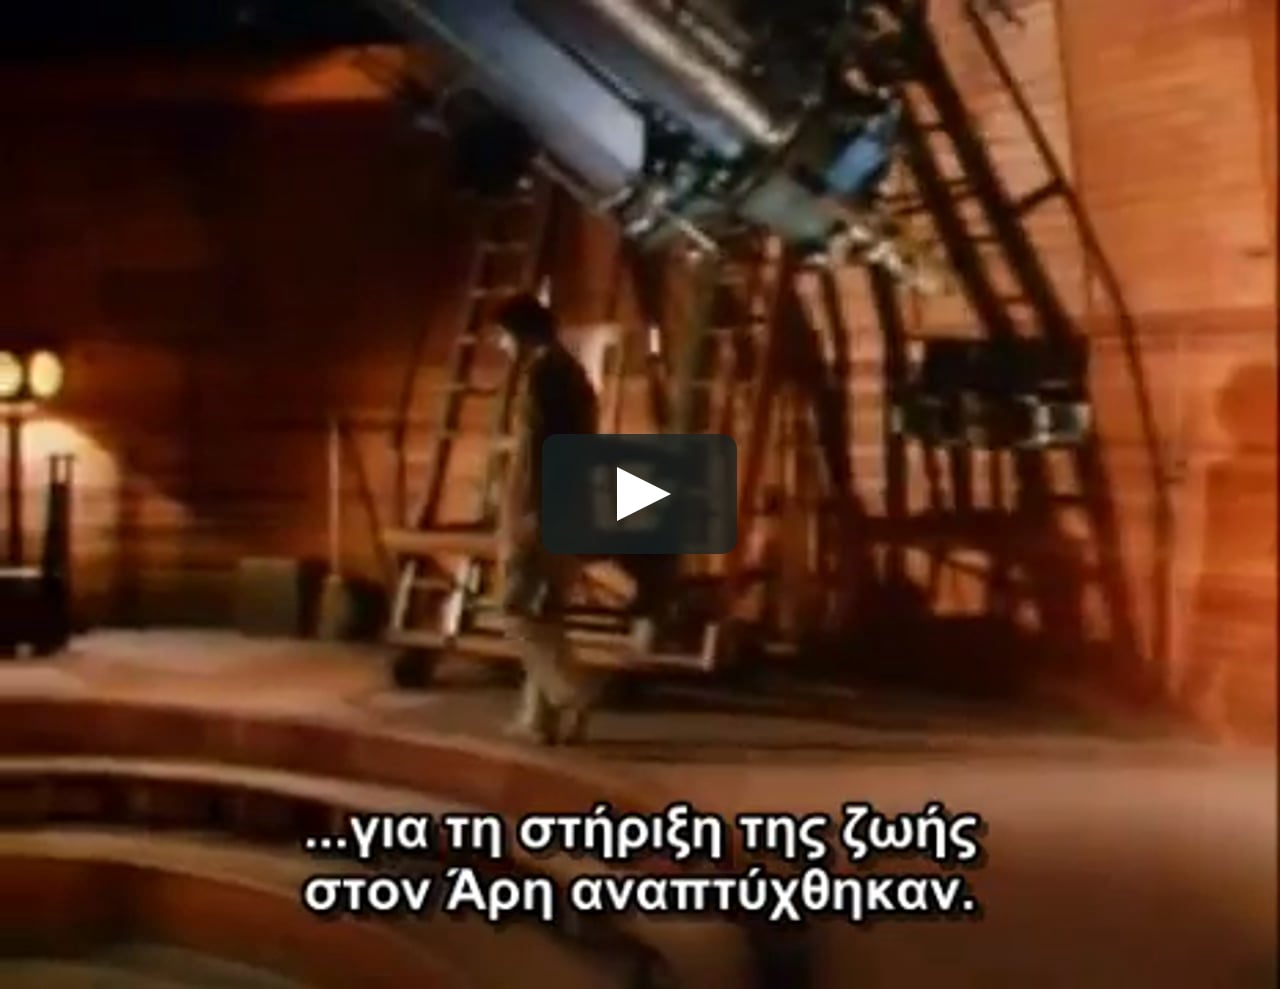 carl-sagan-s-cosmos-episode-5-blues-for-a-red-planet-greek-subs-on-vimeo